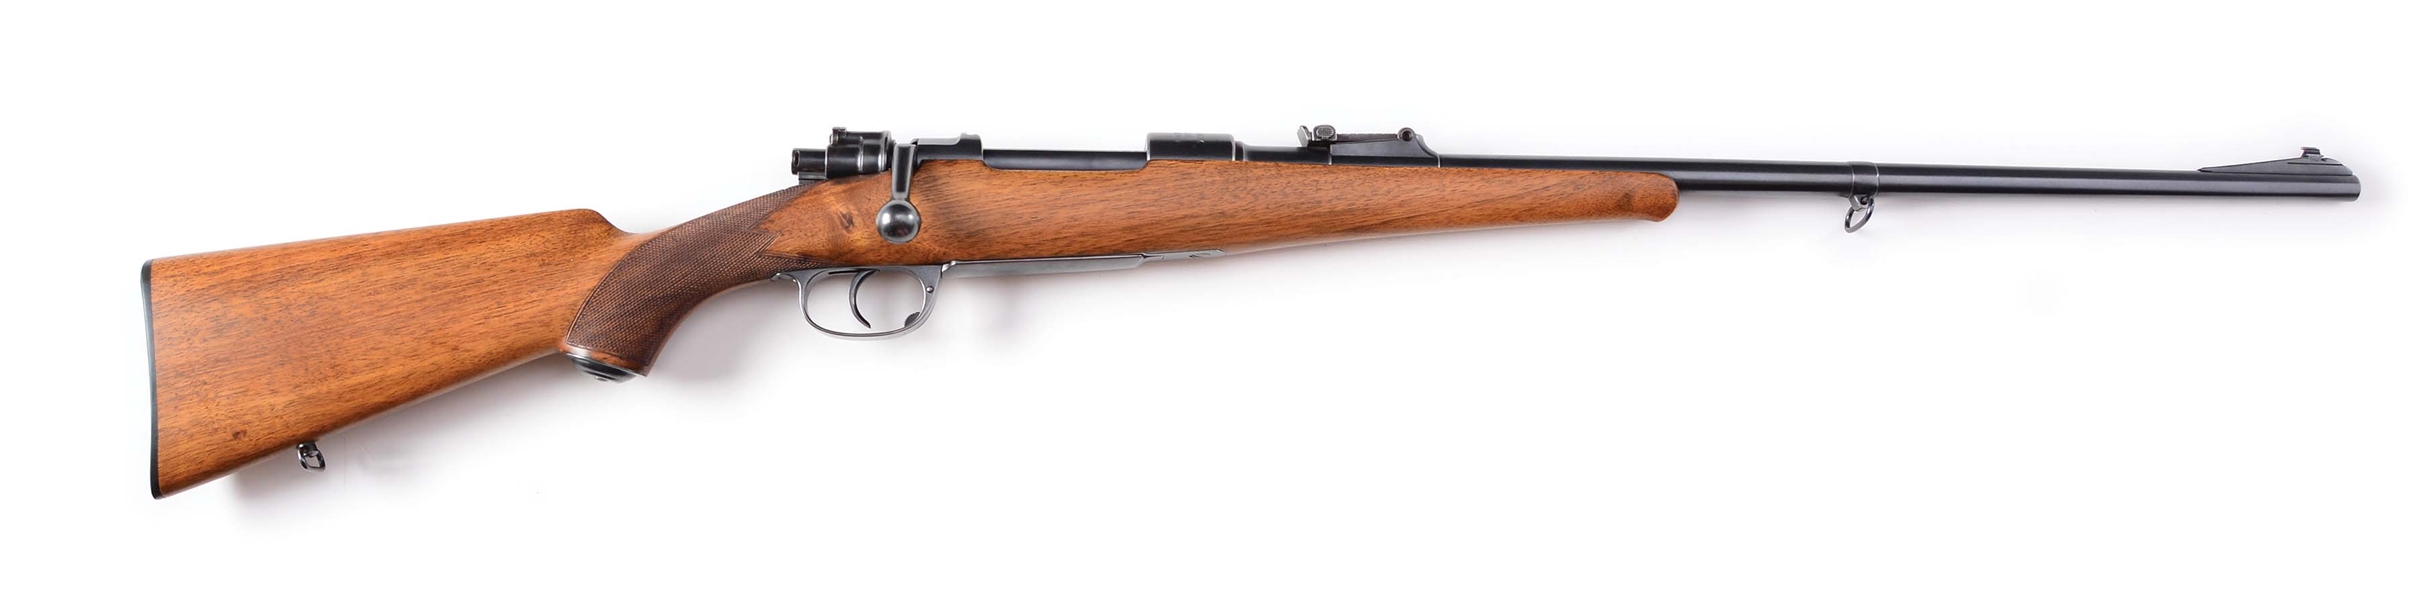 (C) COMMERCIAL MAUSER TYPE B SPORTING RIFLE IN 30-06